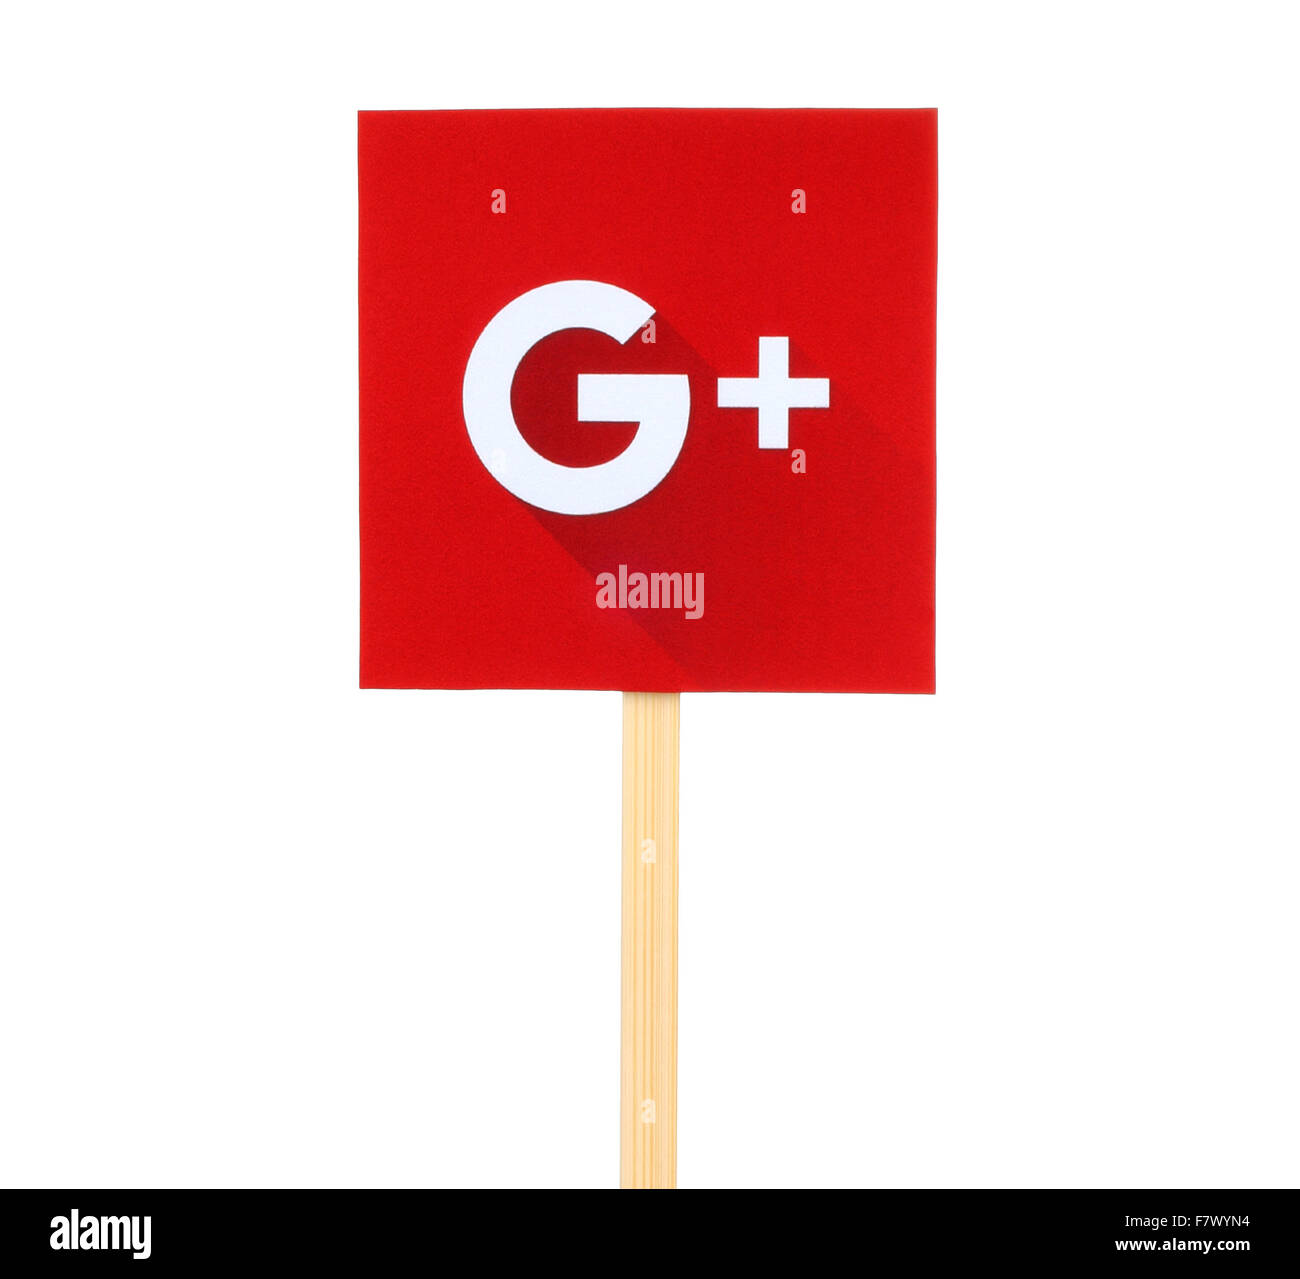 Kiev, Ukraine - October 07, 2015: New Google Plus logo sign printed on paper, cut and pasted on wooden stick. Stock Photo